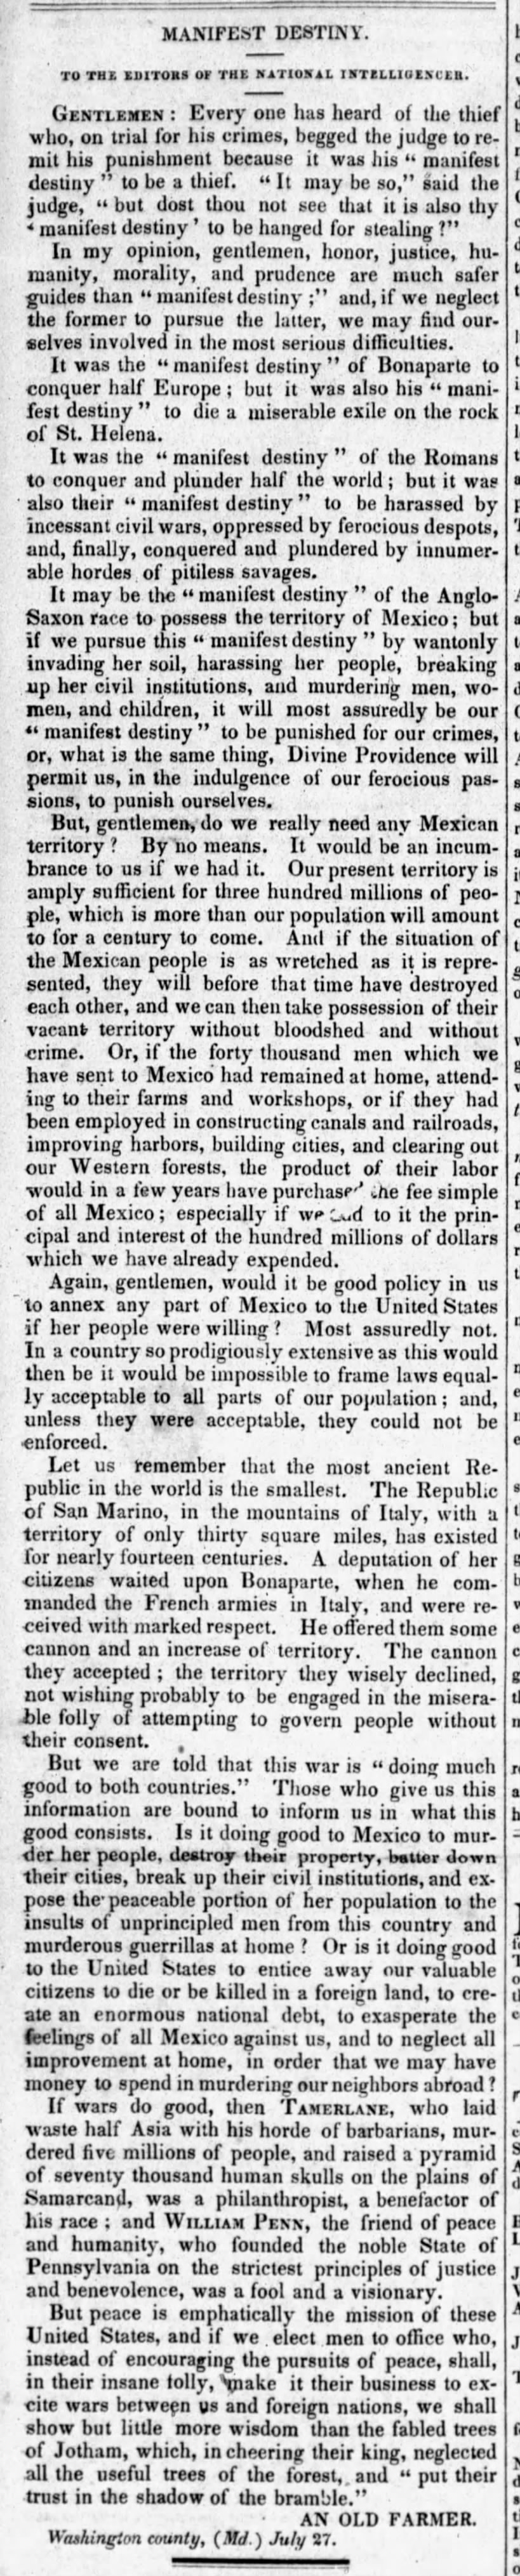 Newspaper letter to the editor arguing against Manifest Destiny and the Mexican-American War